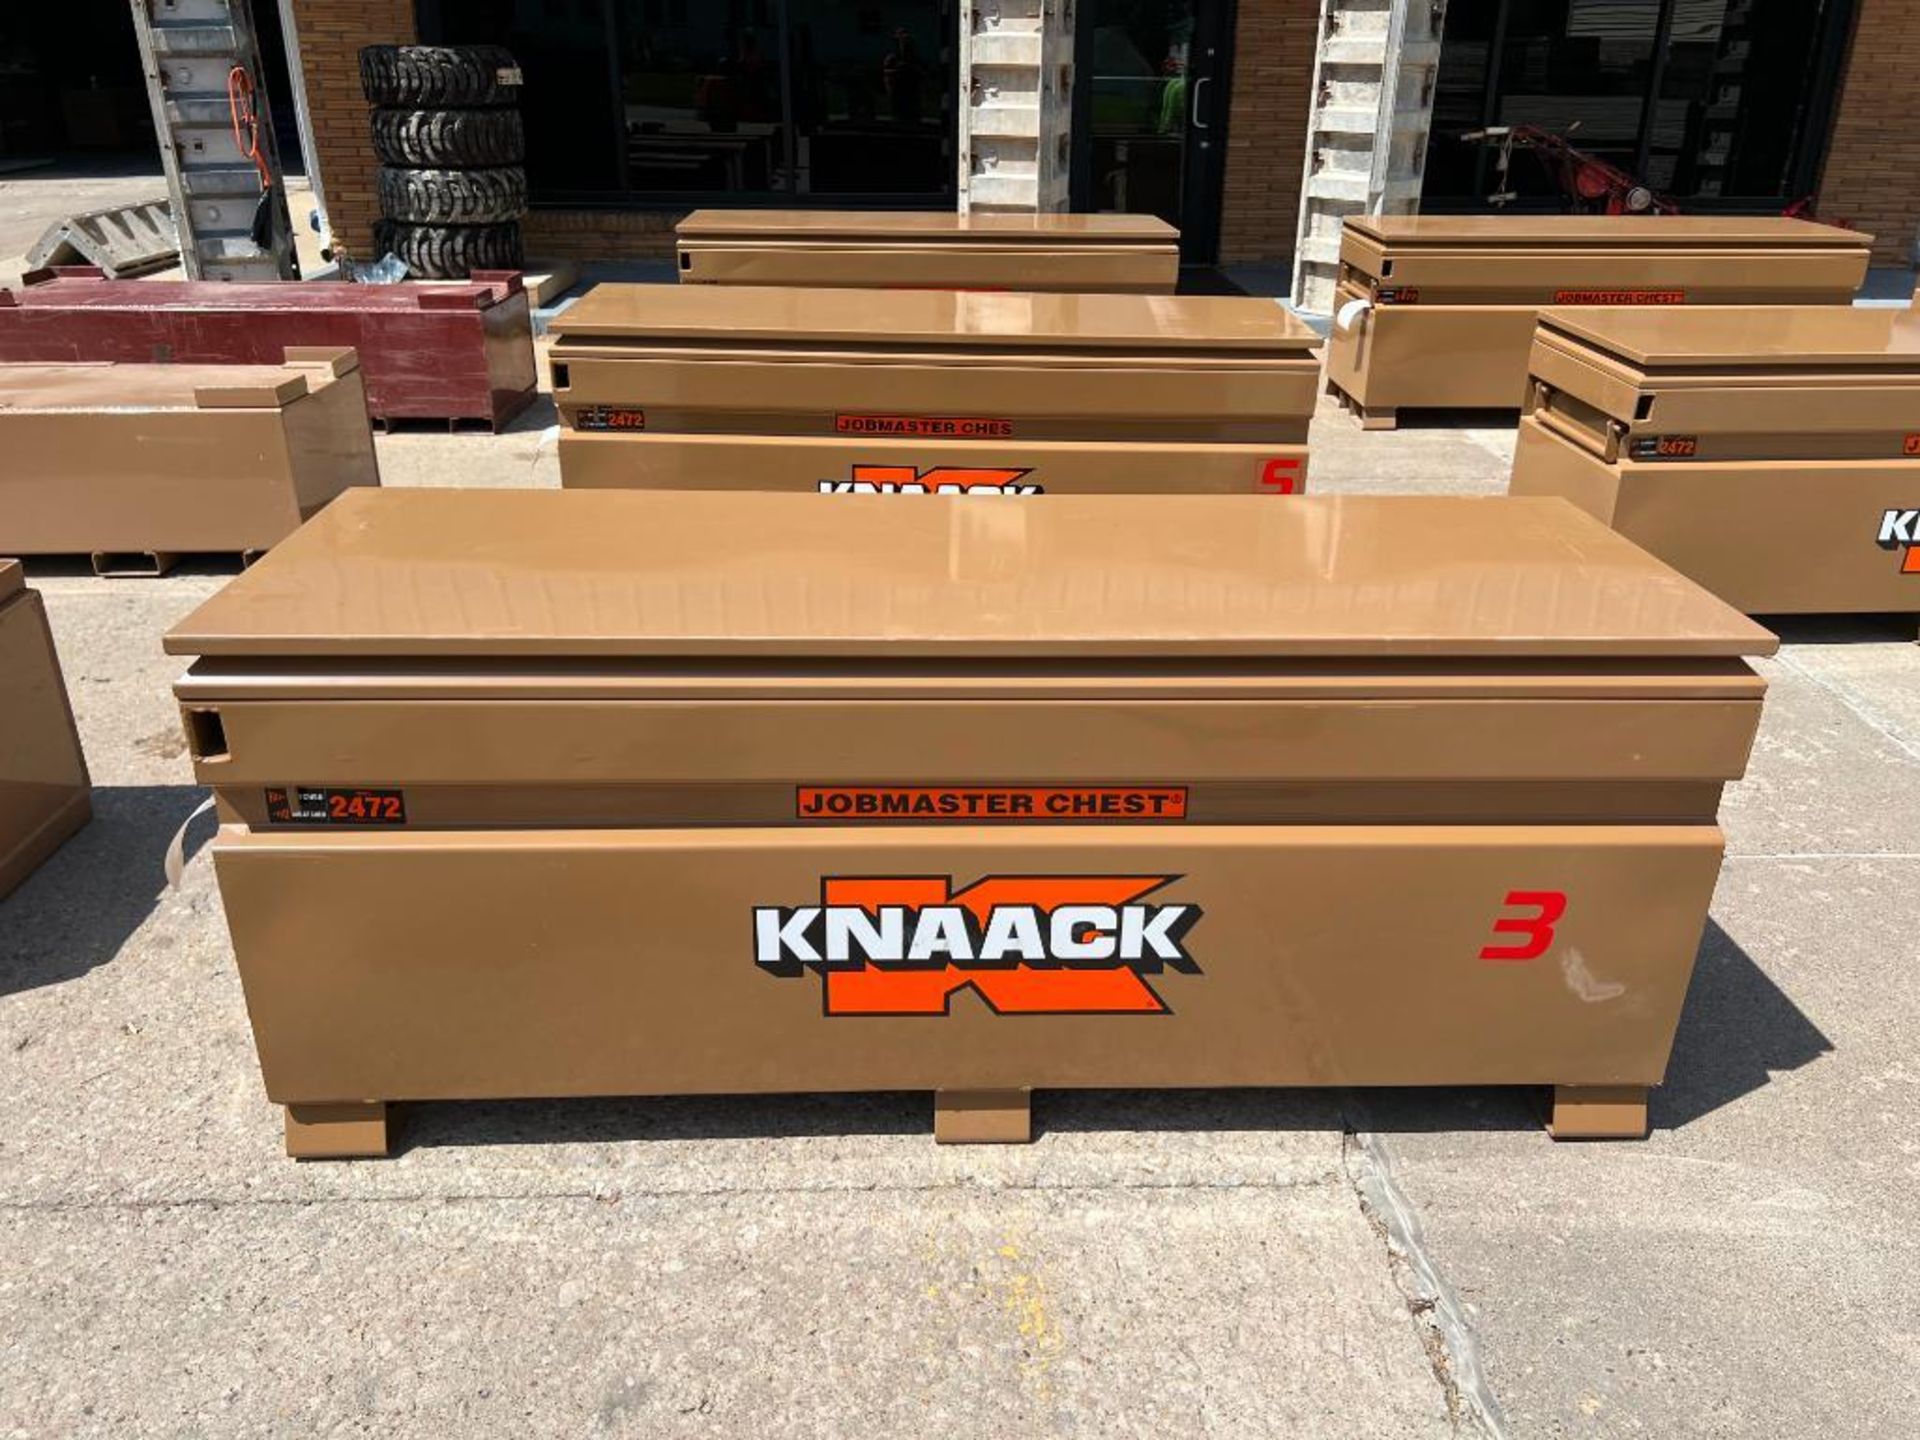 Knaack Jobmaster Chest, Model #2472, Serial #2211017665. Located in Mt. Pleasant, IA